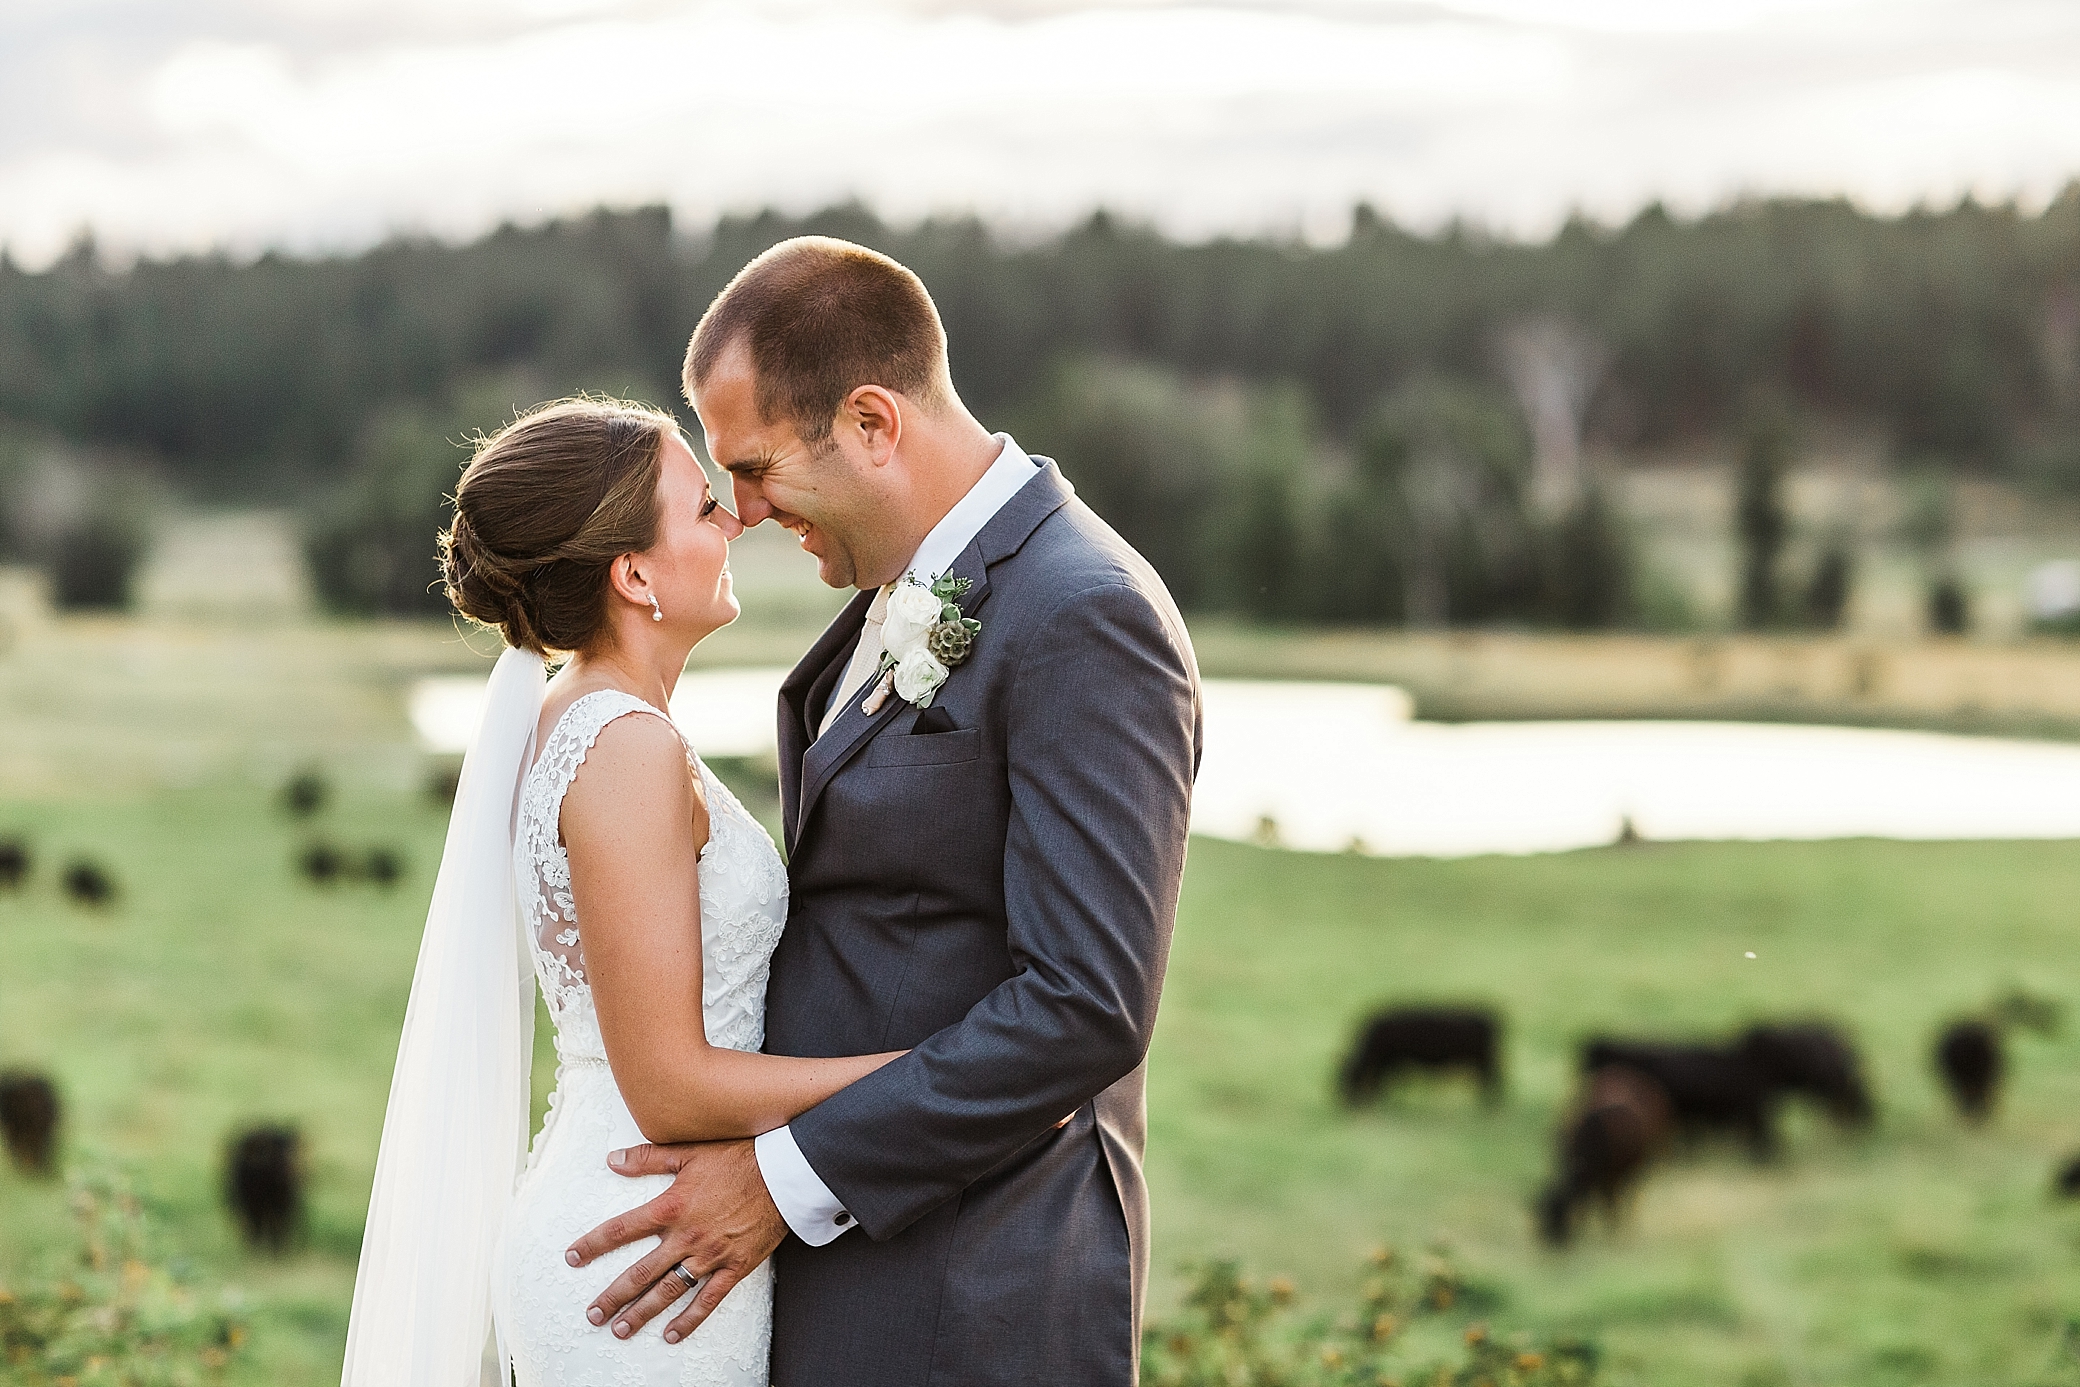 Bride and Groom Wedding Portraits at The Cattle Barn | Megan Montalvo Photography